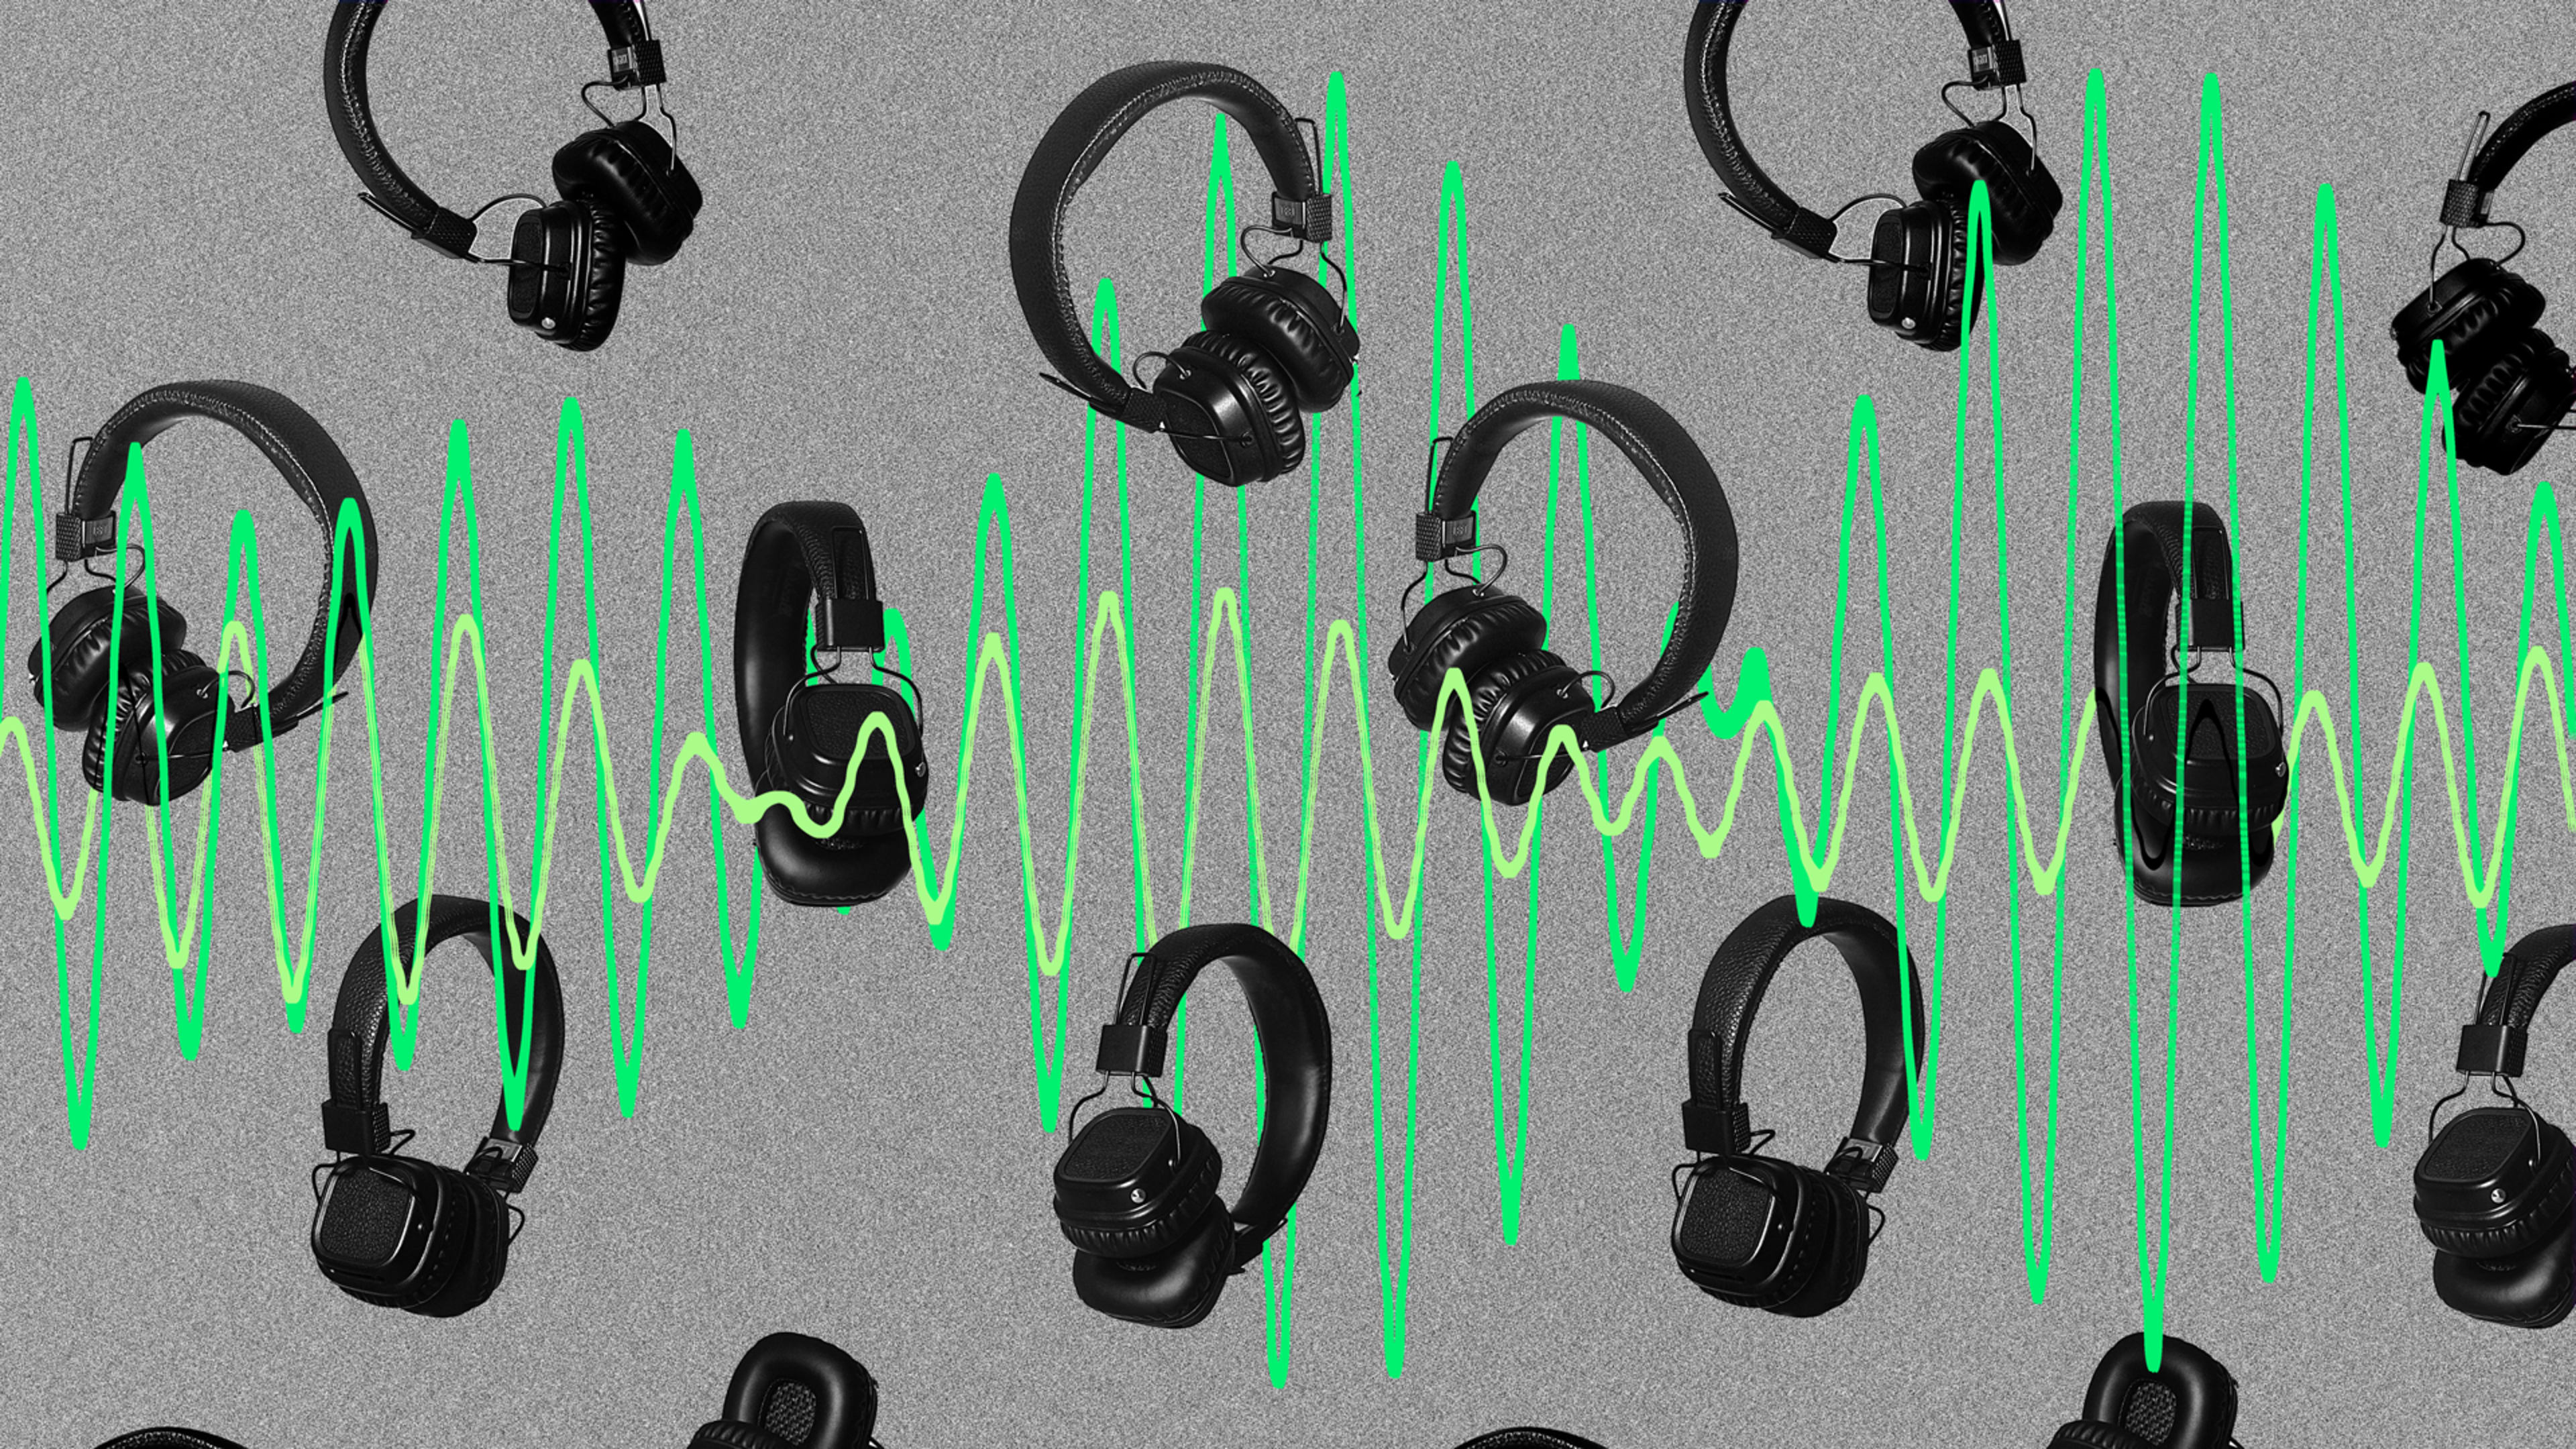 Spotify listening trends are eerily correlated with the market’s highs and lows